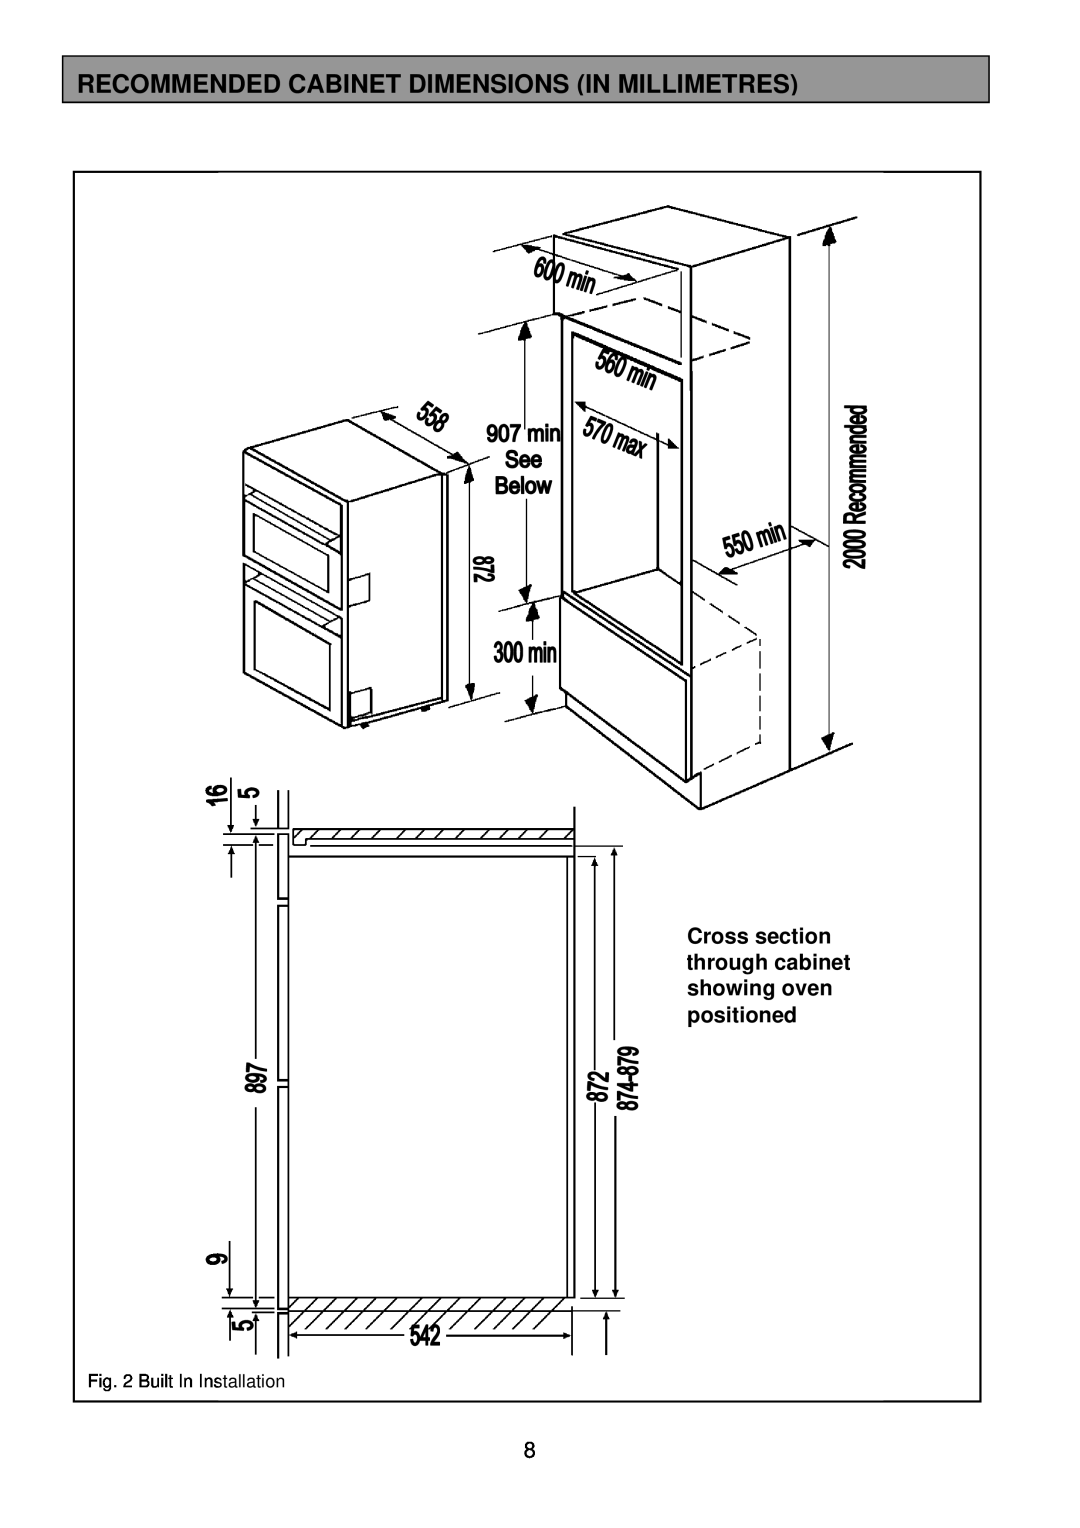 Zanussi ZDQ 895 manual Recommended Cabinet Dimensions In Millimetres, Cross section through cabinet showing oven positioned 